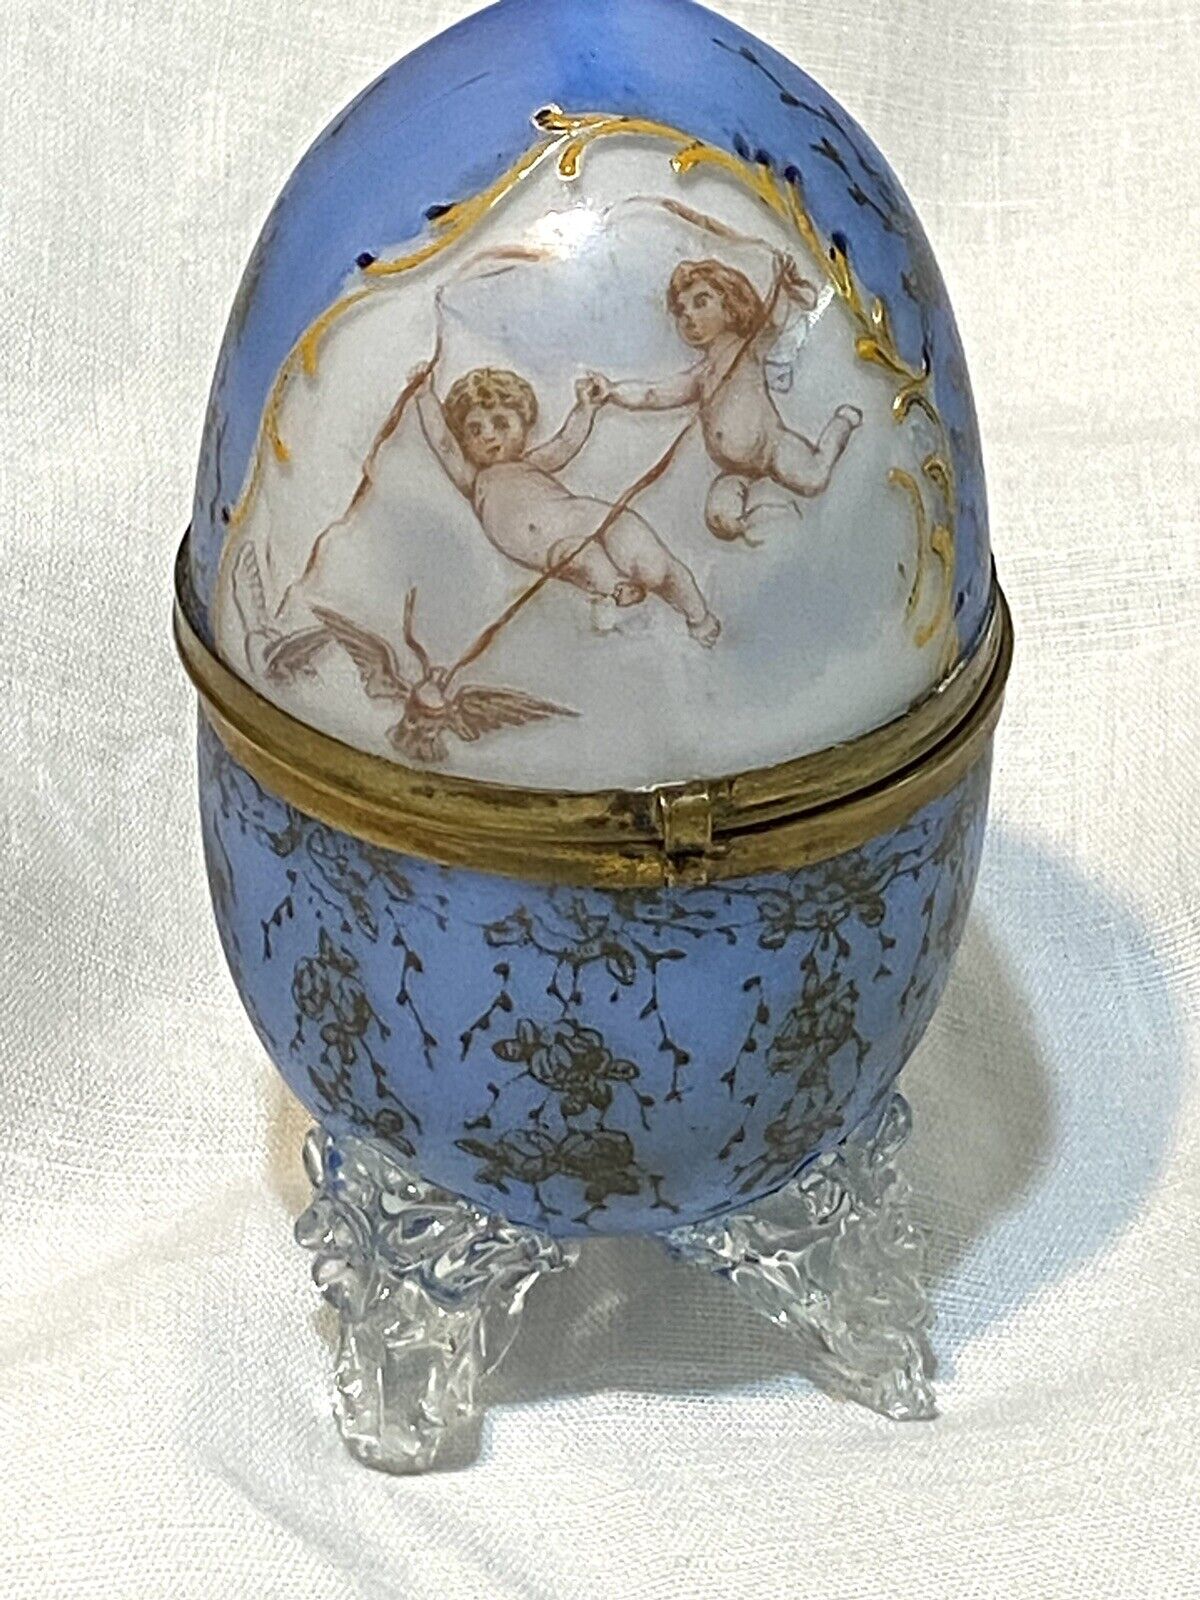 GREAT ANTIQUE VERY BIG EGG SHAPE HAND PAINTED OPALINE FOOTED BOX W/CHERUBS. 7”